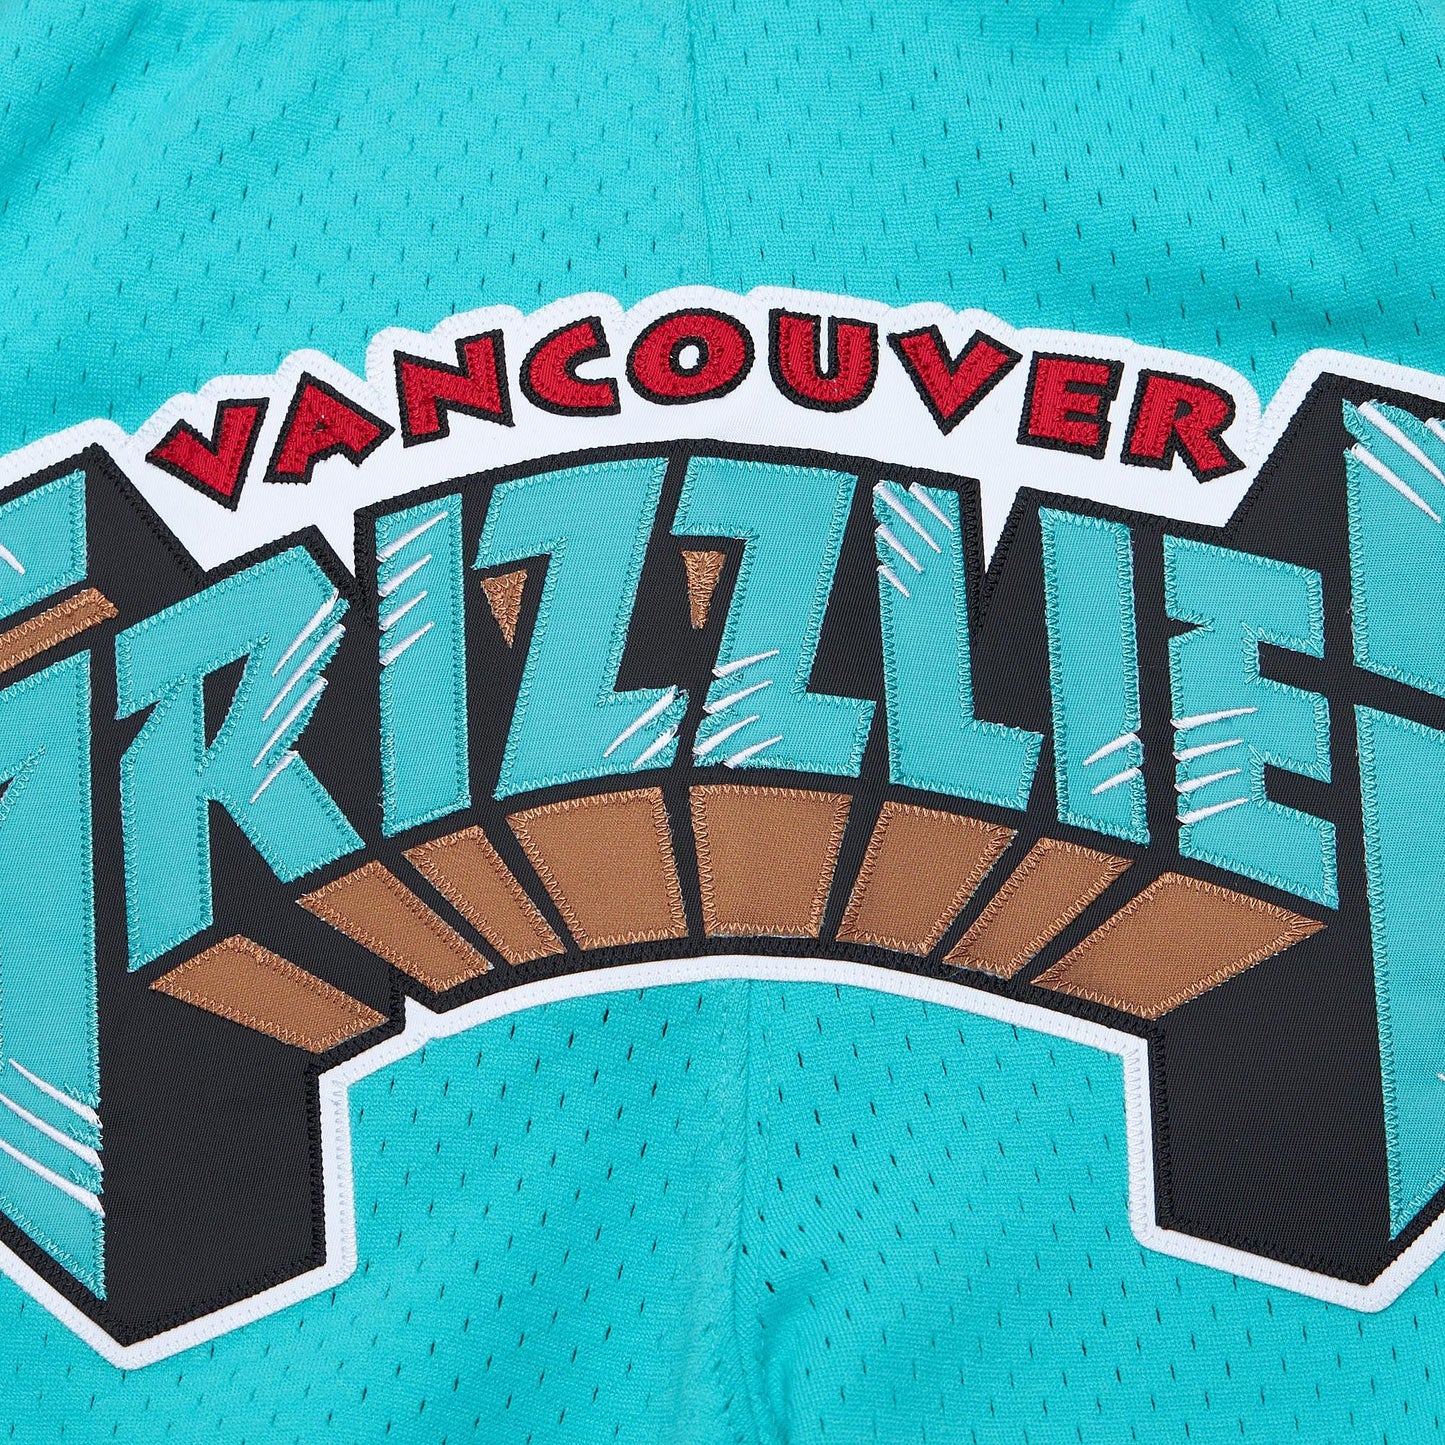 NBA Just Don 7 Inch Shorts Vancouver Grizzlies